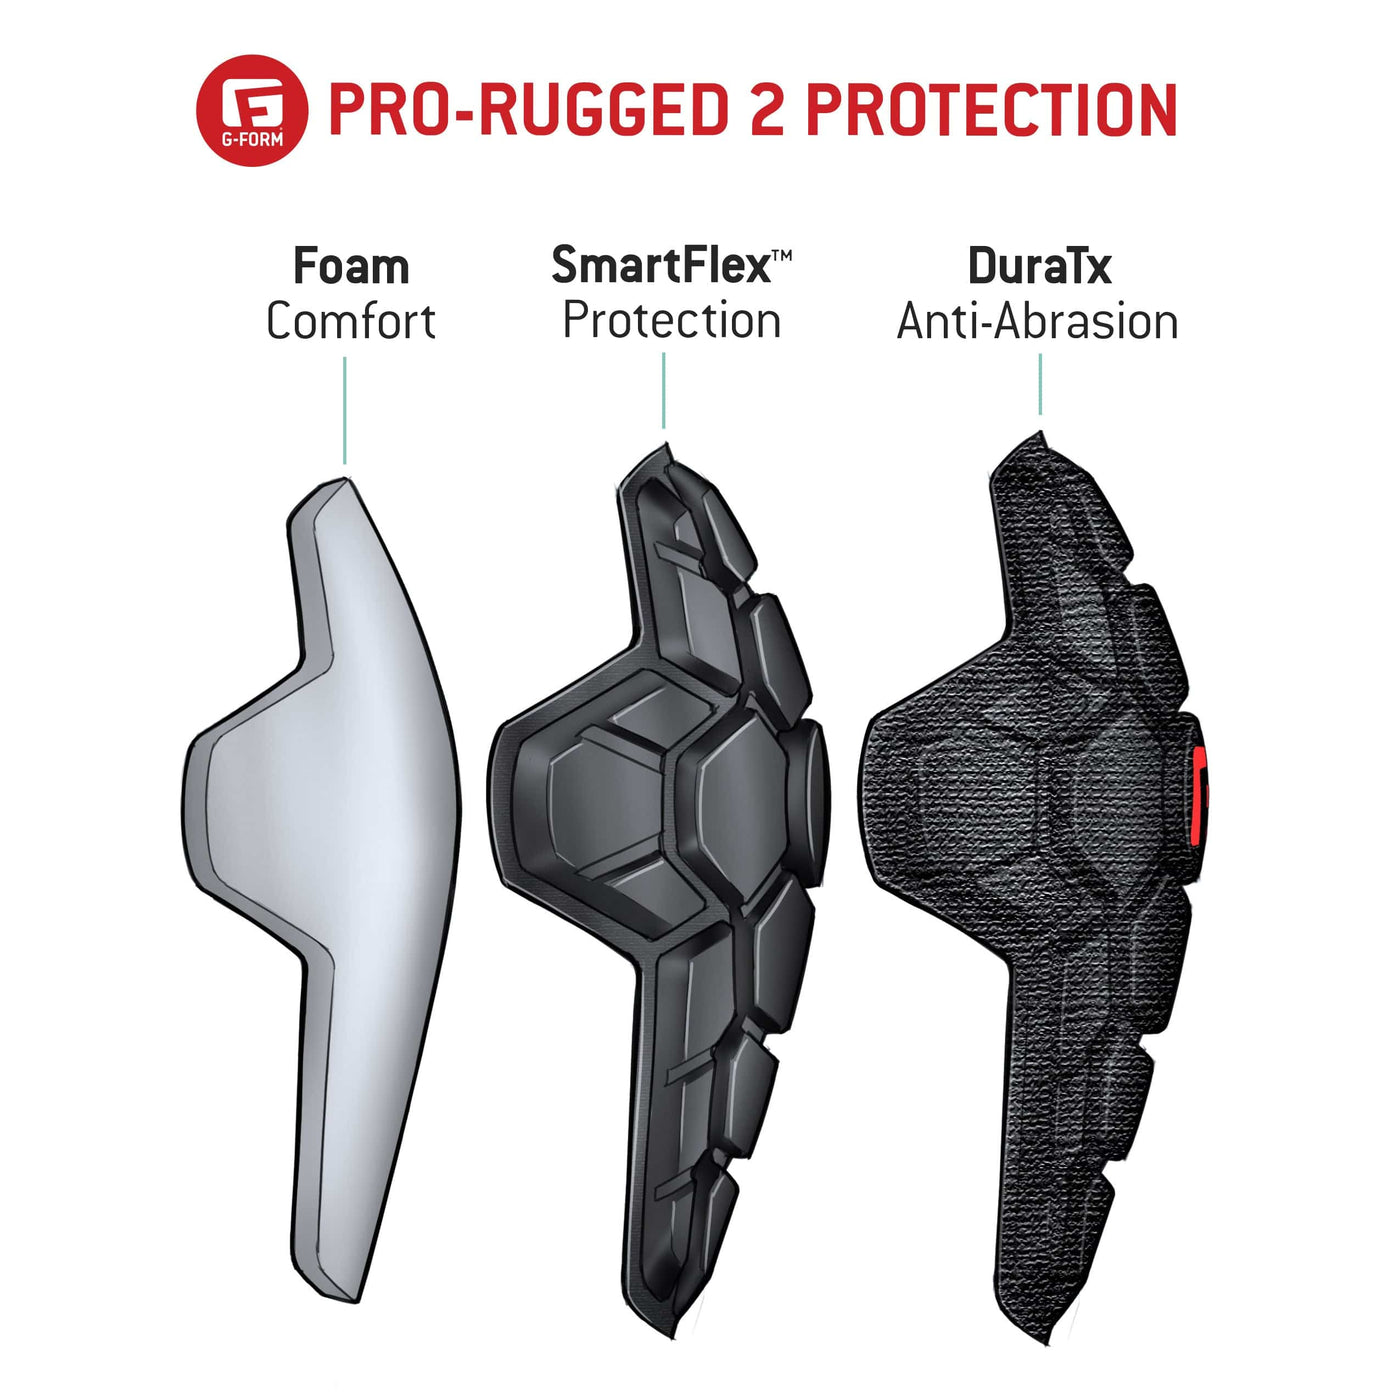 G-Form pro-rugged 2 protection 